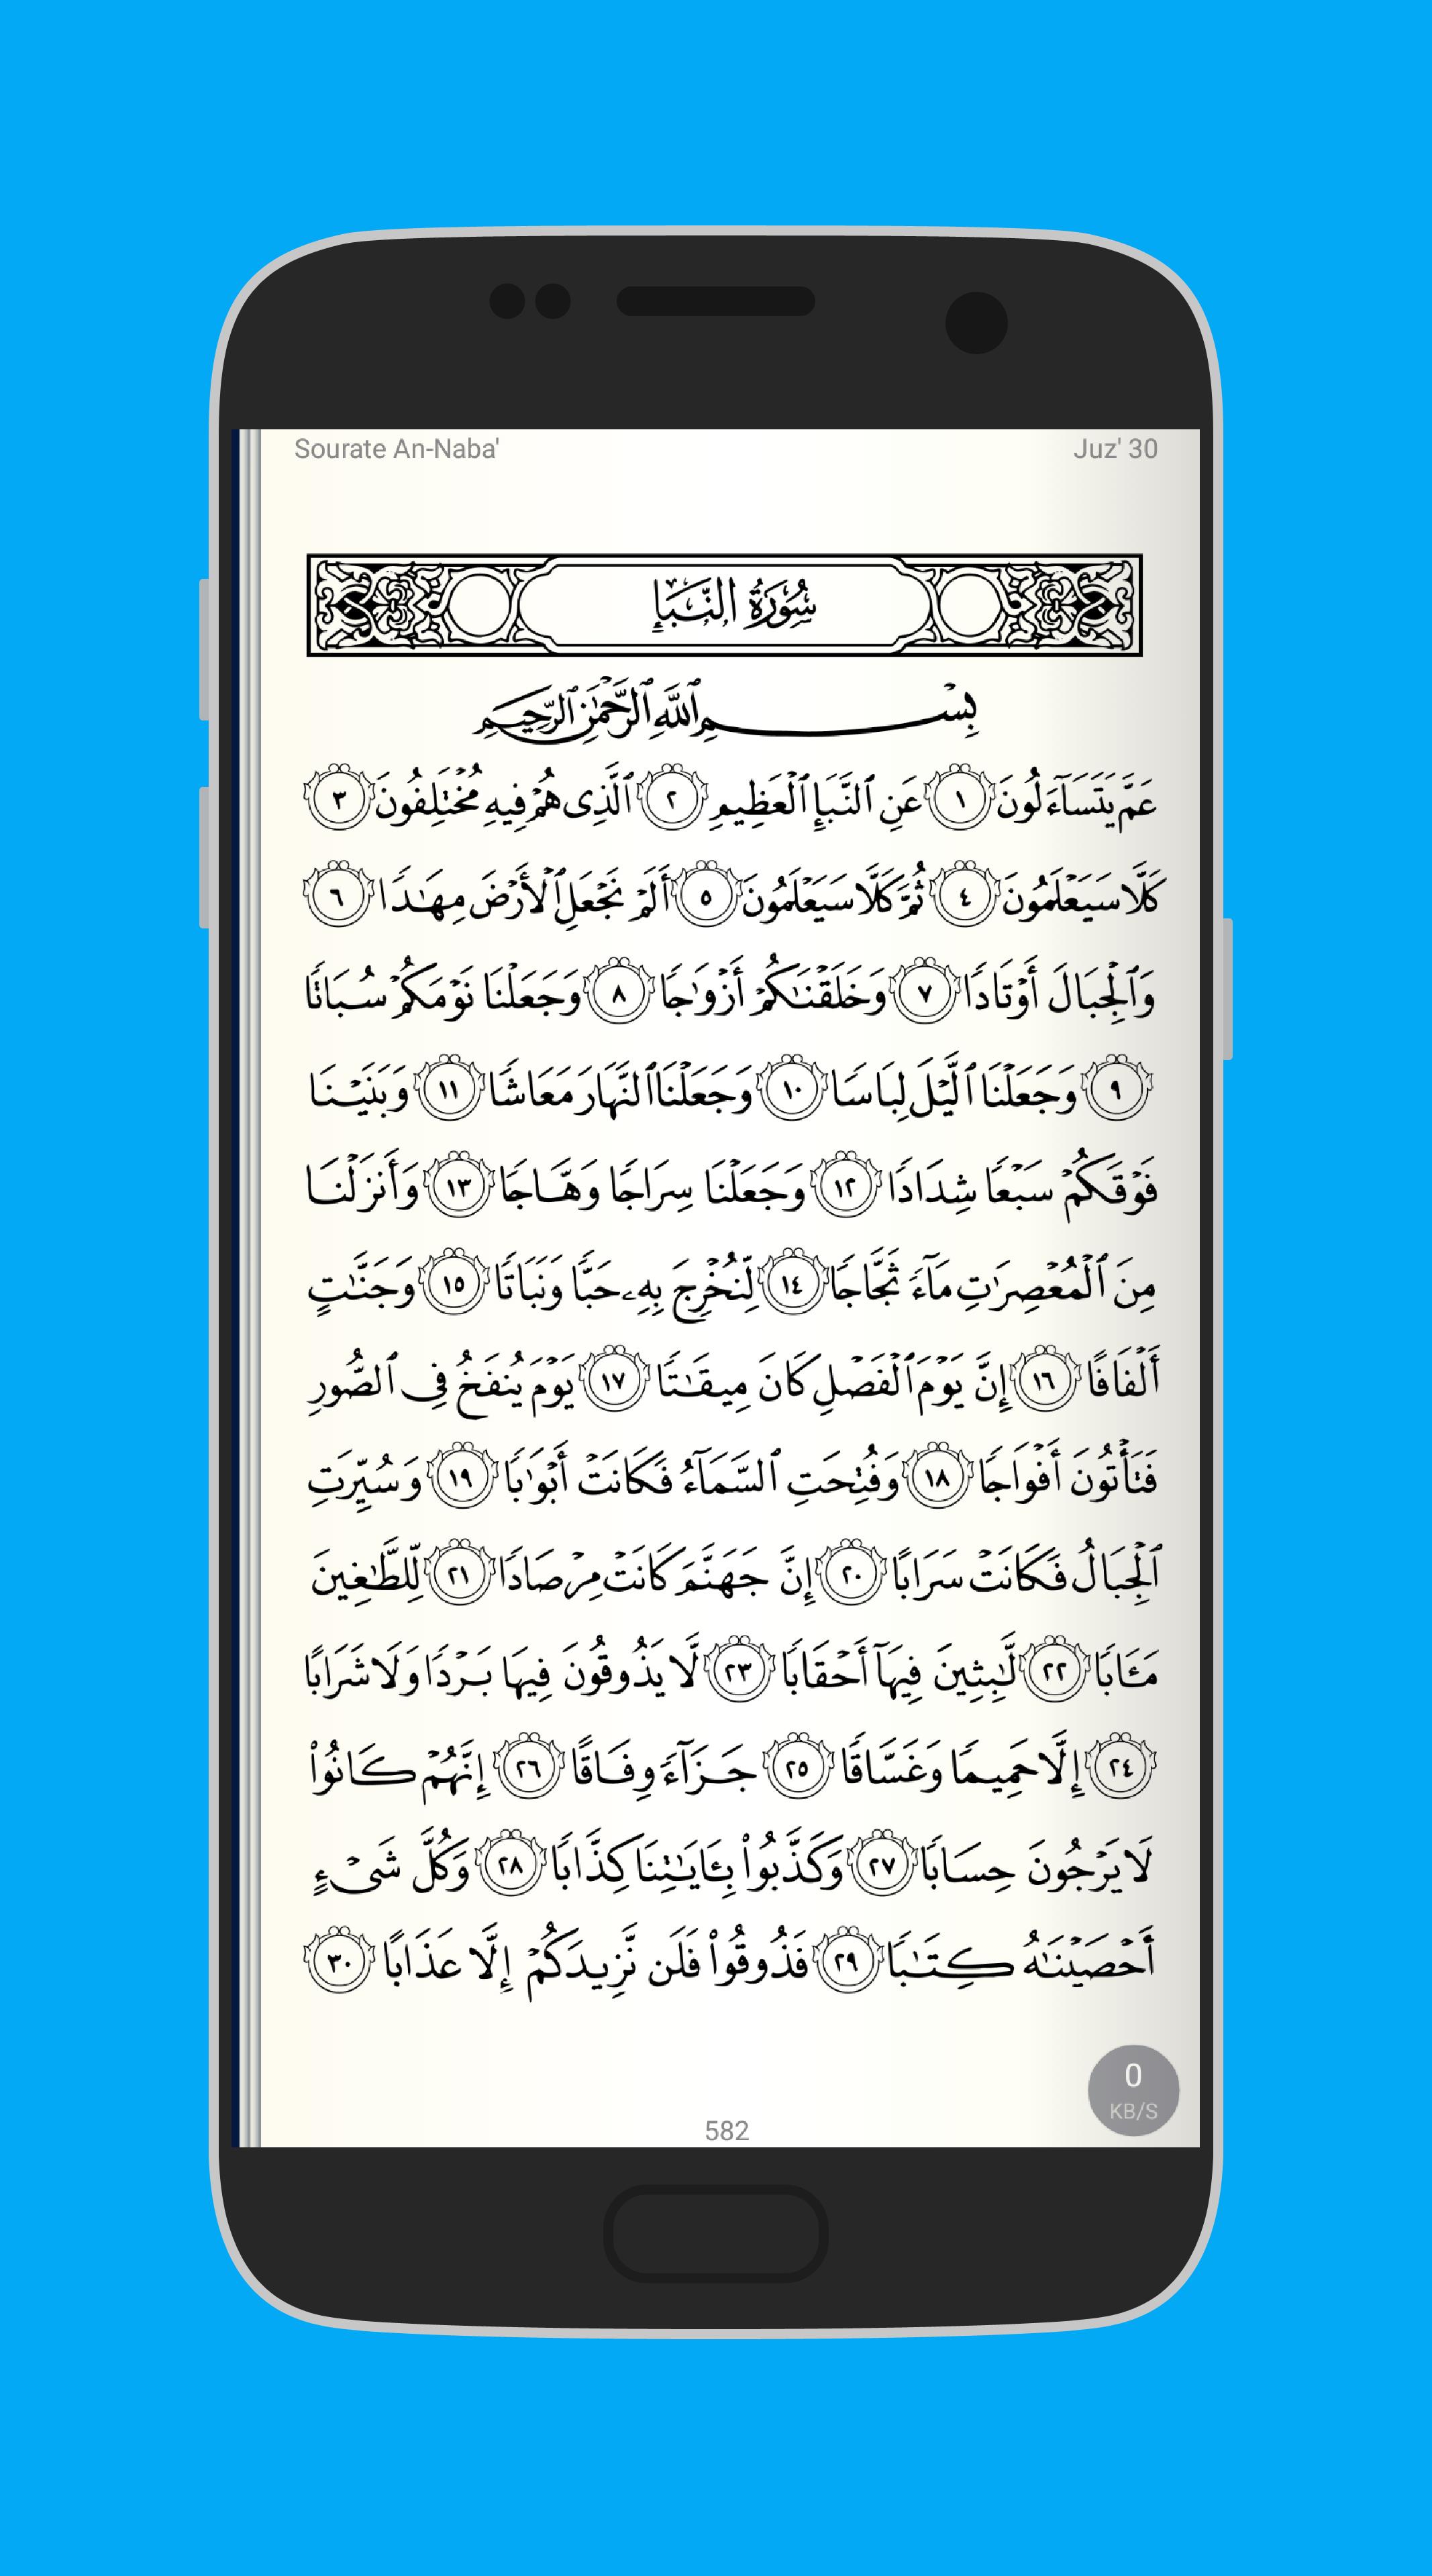 Quran Karim Mp3 For Free for Android - APK Download